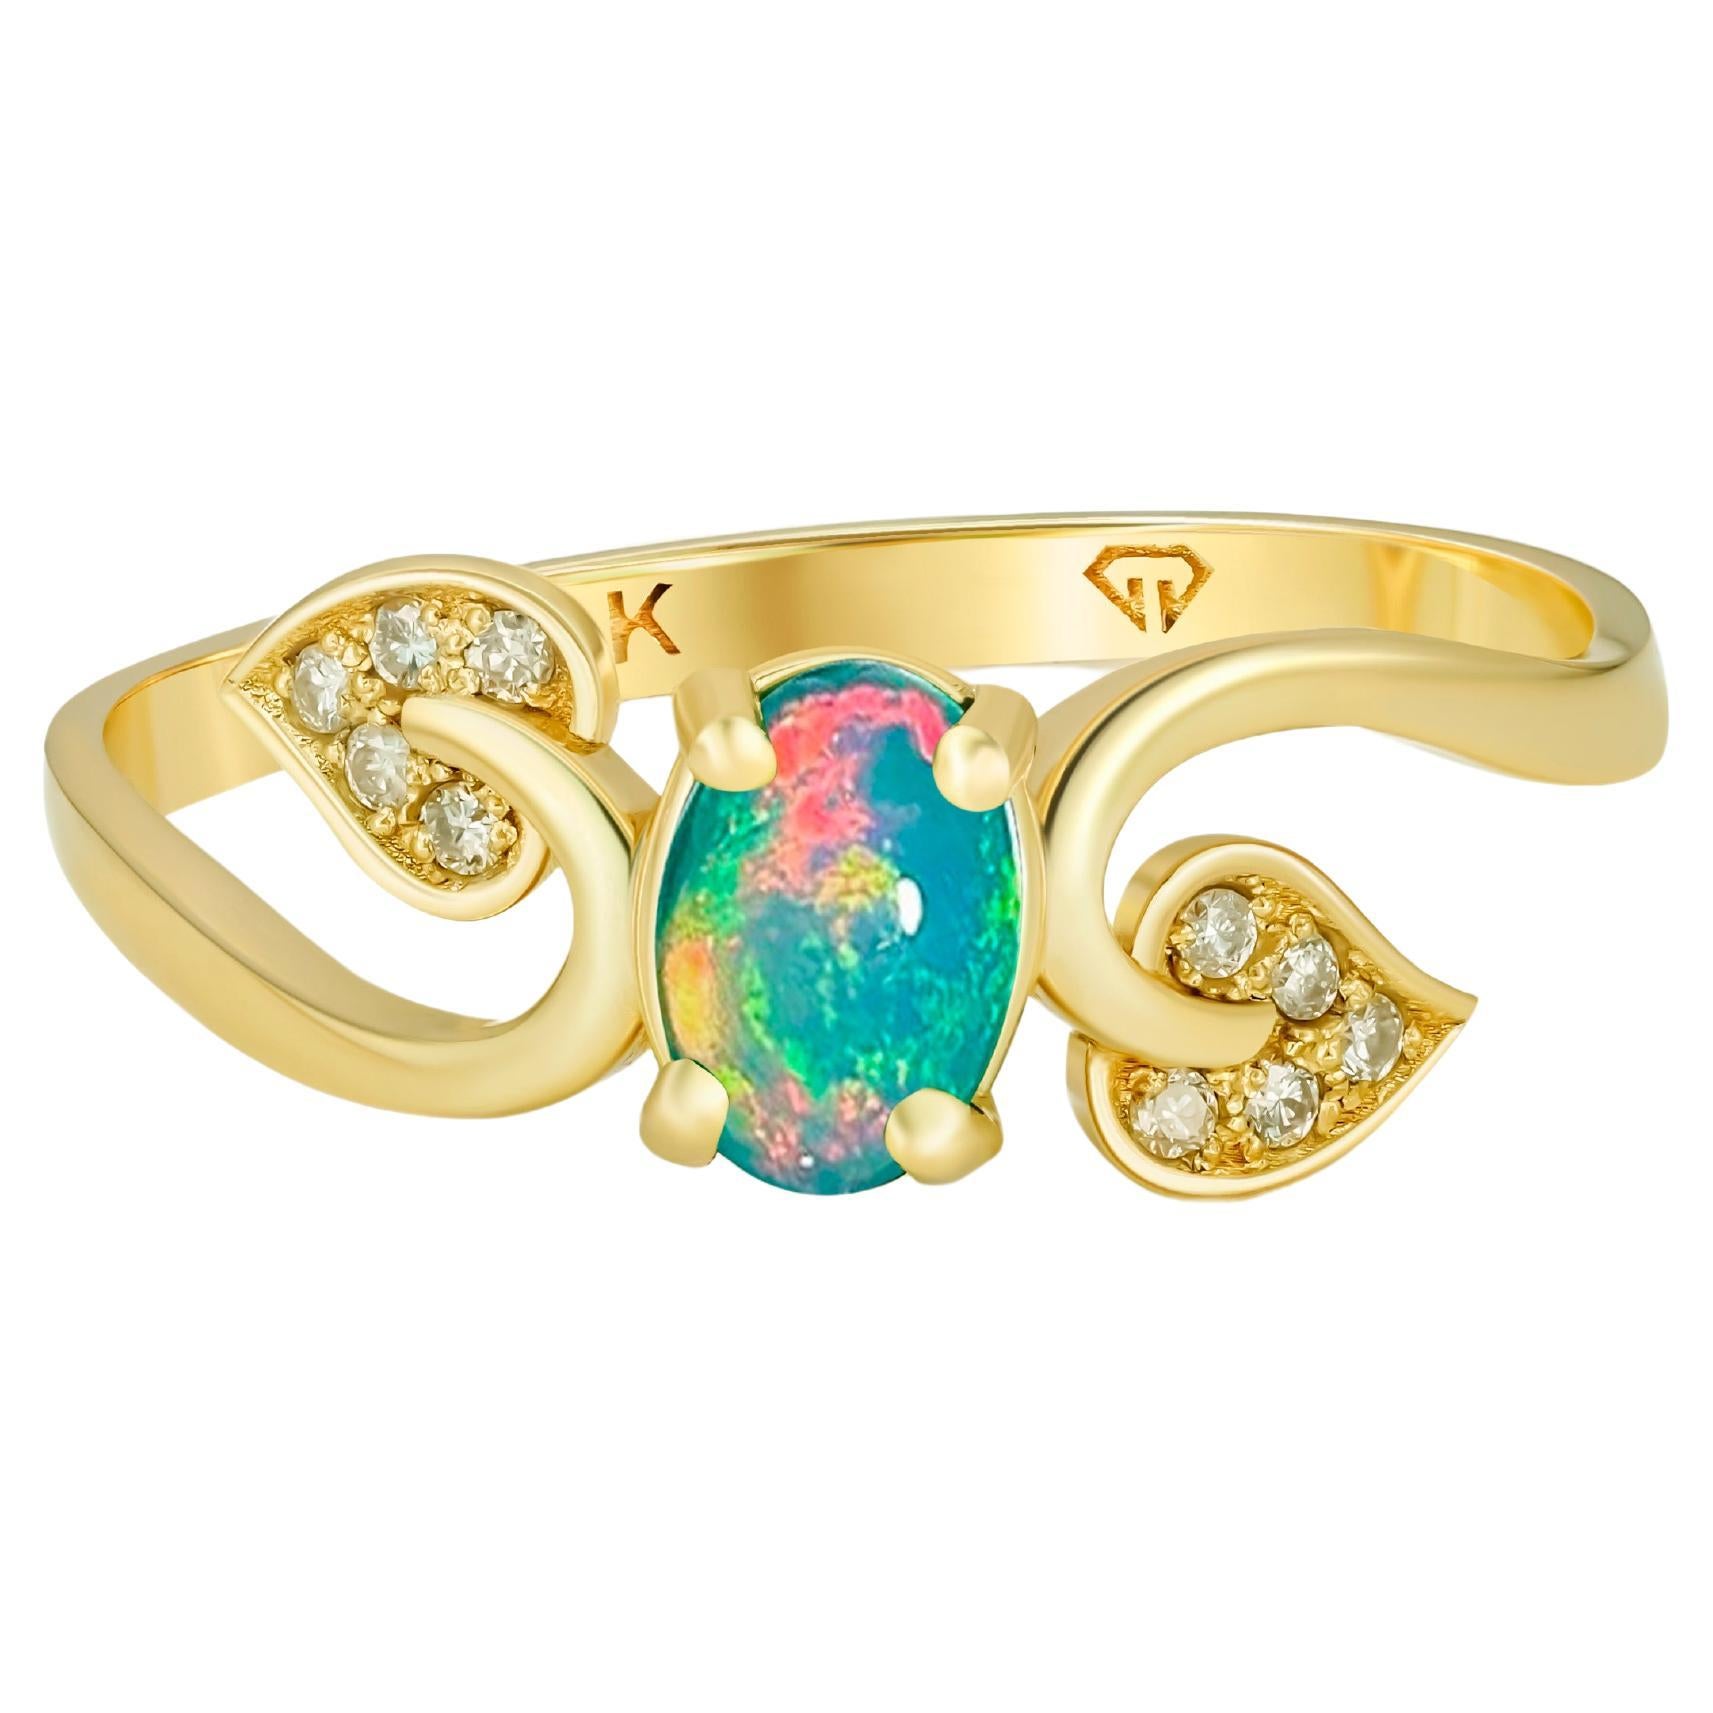 Gold leaves ring with opal. 